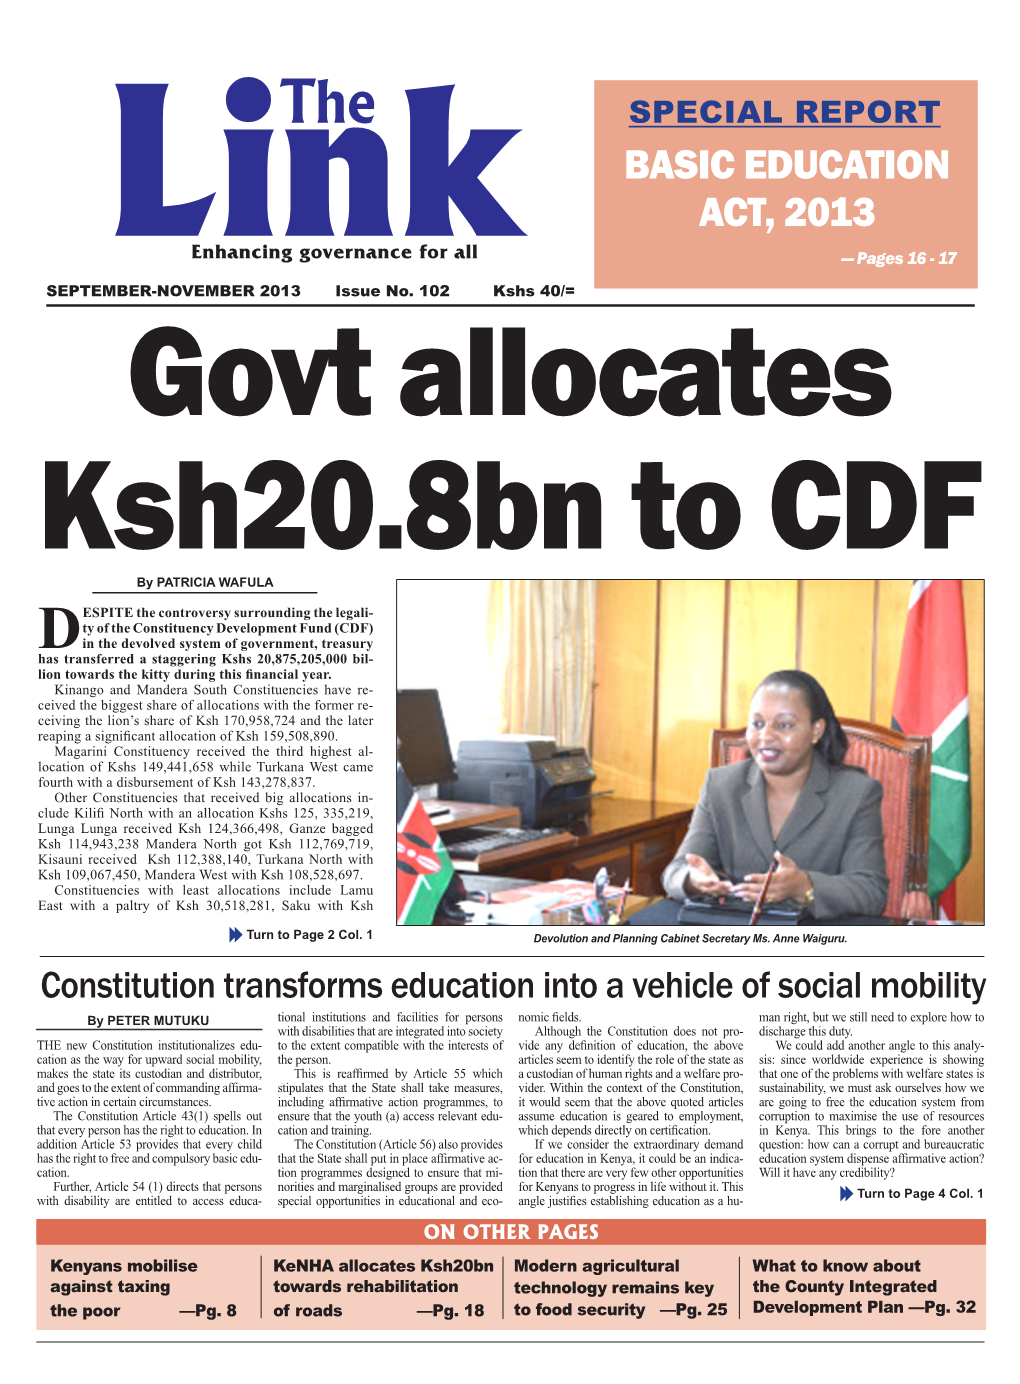 BASIC EDUCATION ACT, 2013 Lenhancingink Governance for All — Pages 16 - 17 SEPTEMBER-NOVEMBER 2013 Issue No